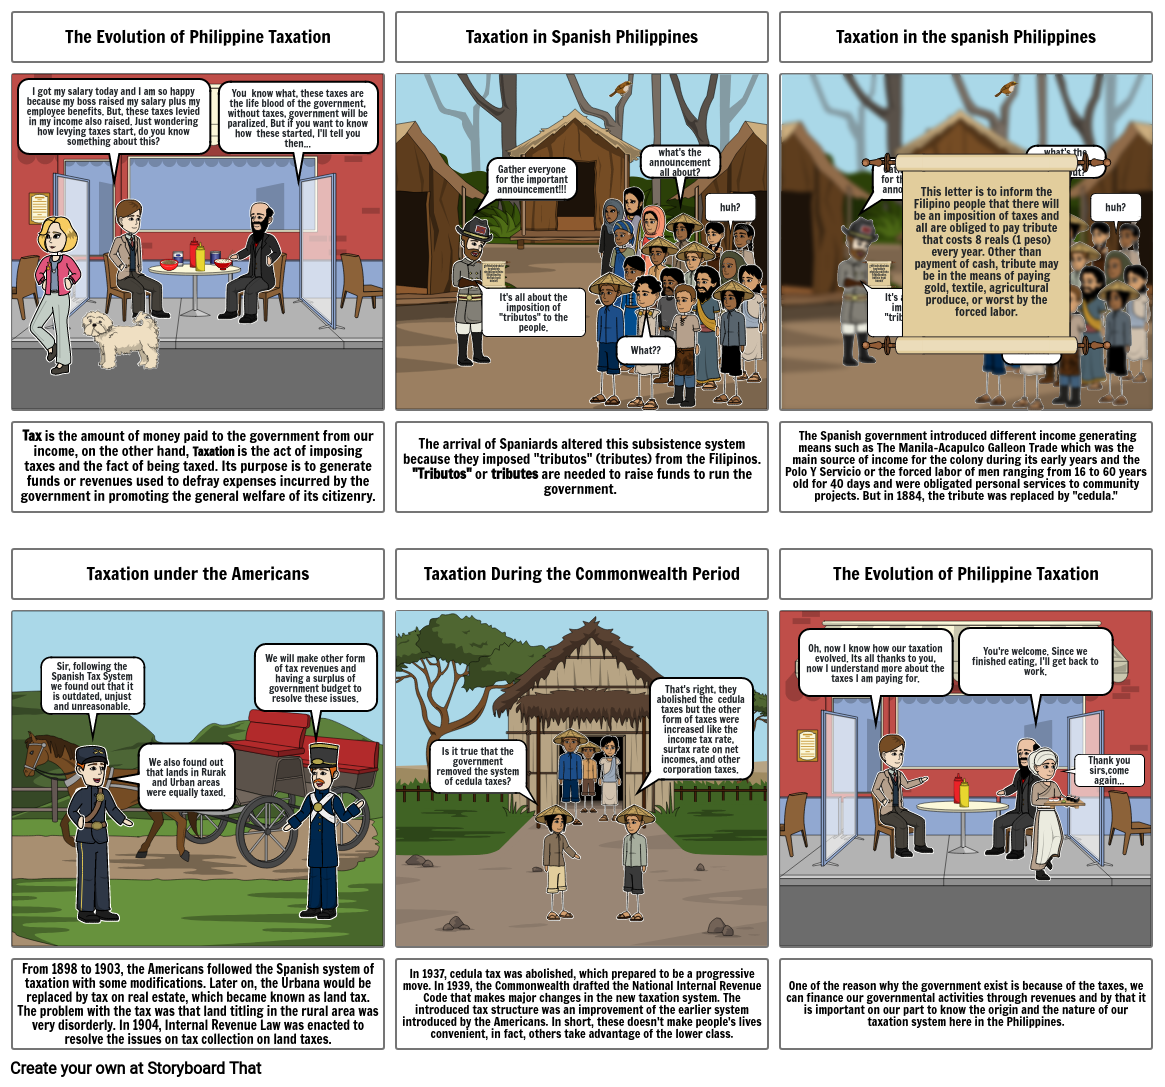 Evolution of Philippine Taxation Storyboard by melvin15010